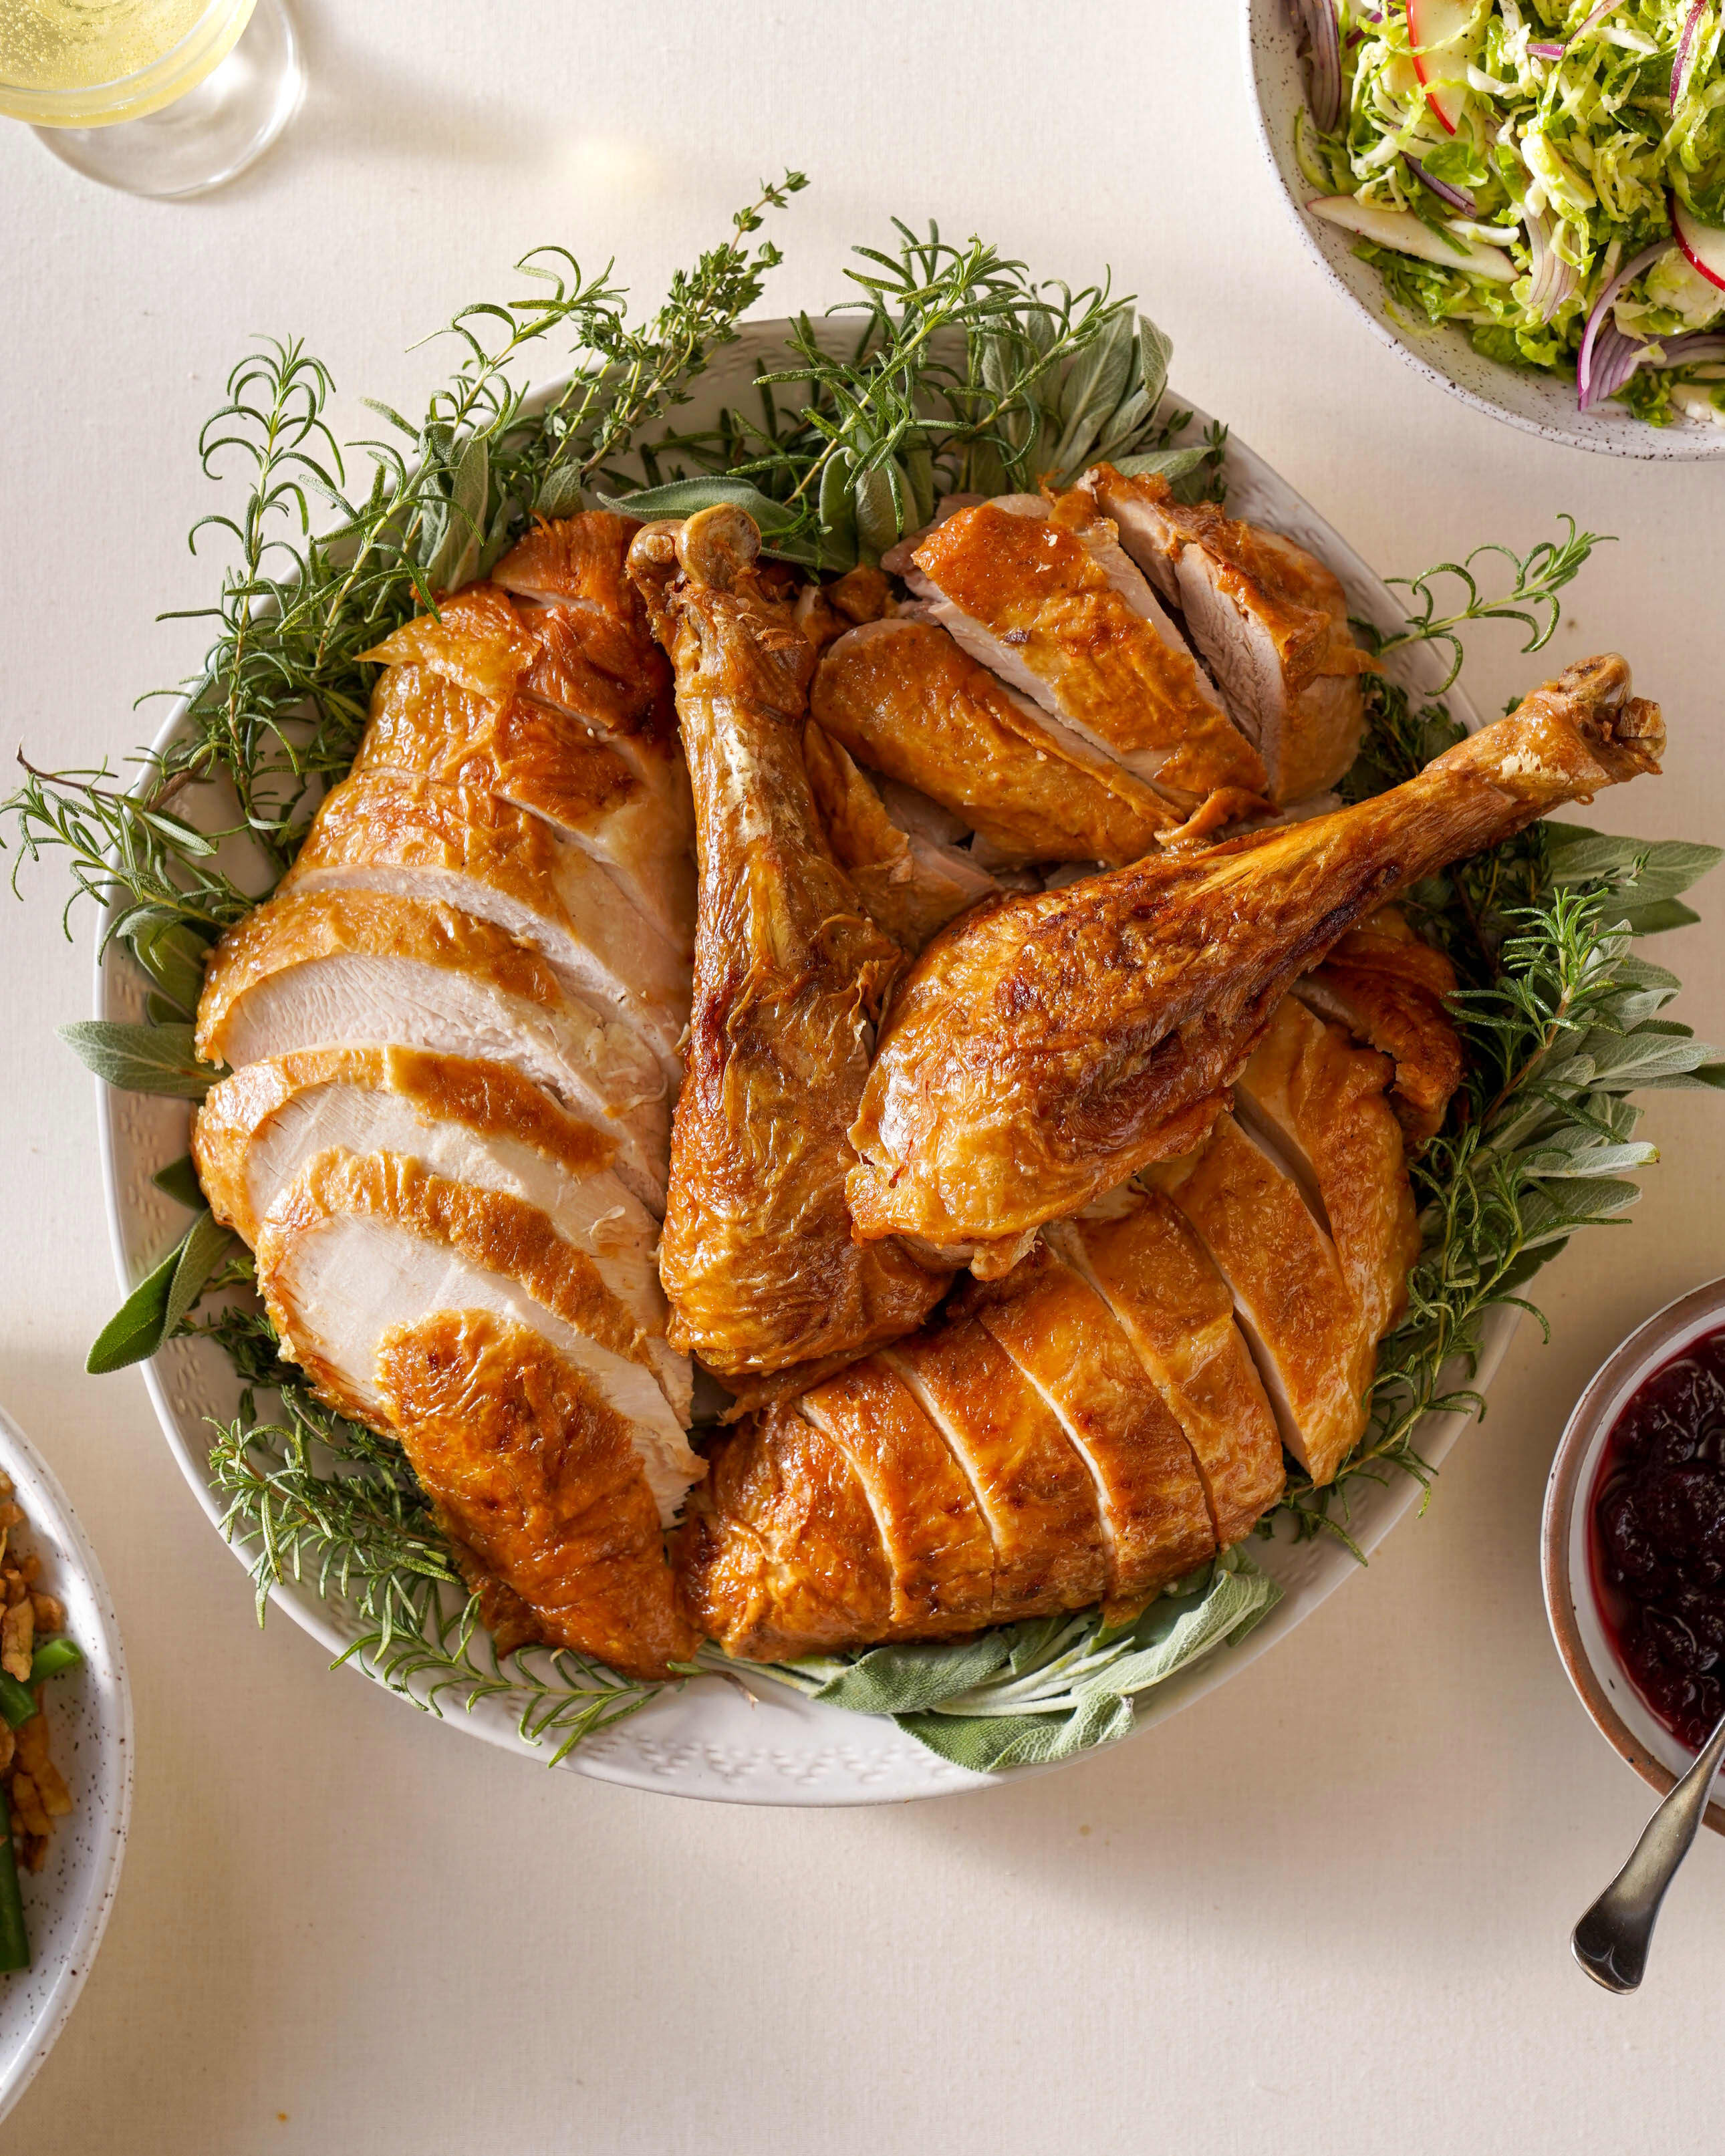 How to Cook a Turkey: The Simplest Method for the Best Bird